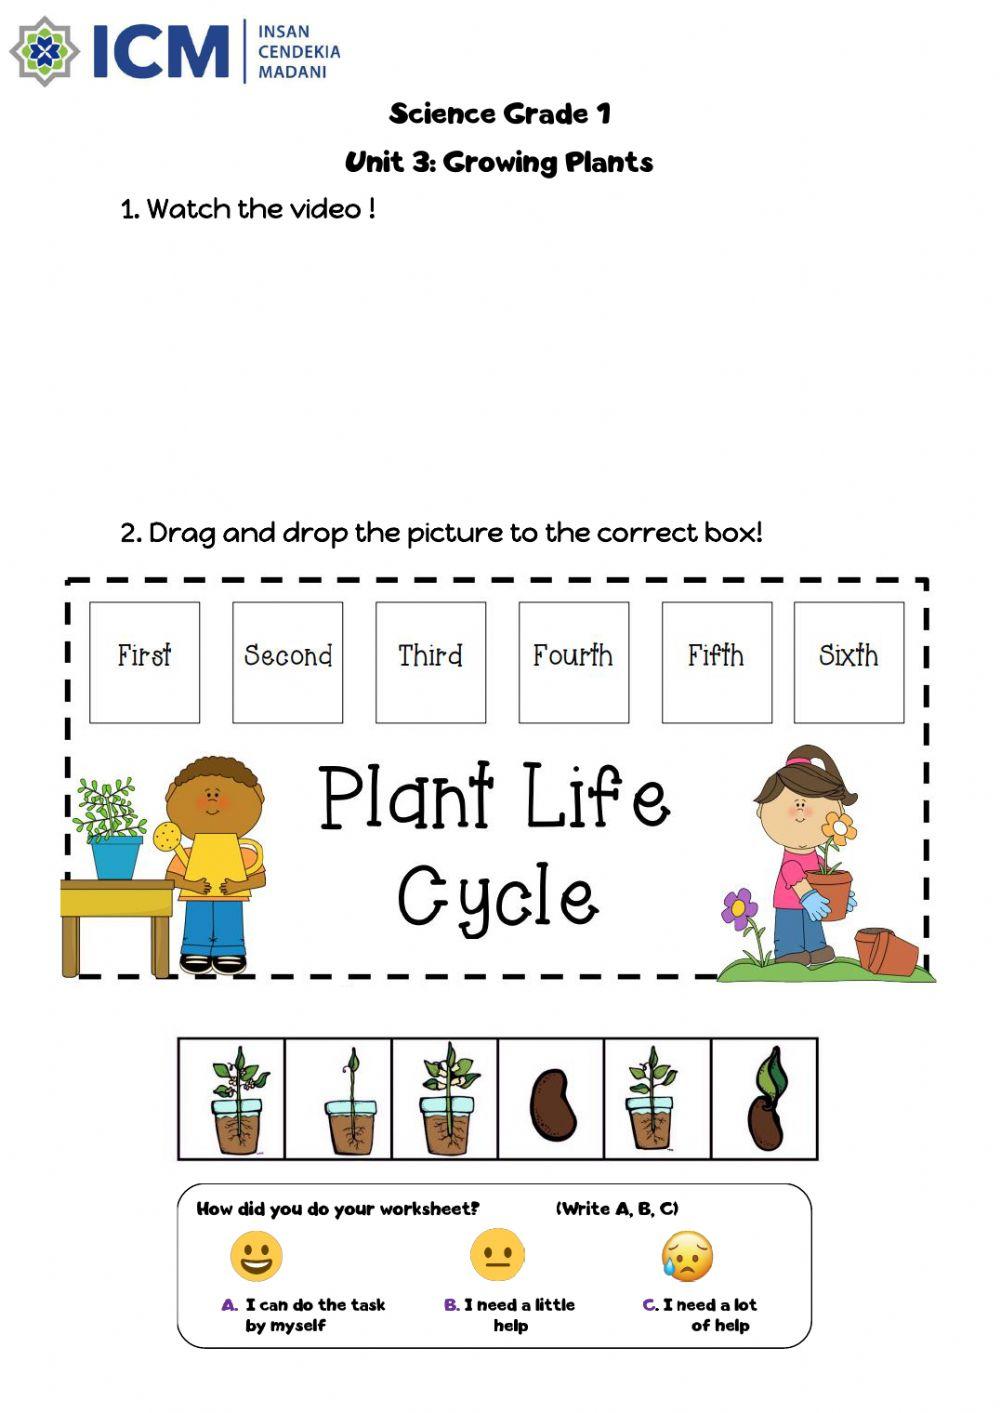 Science-Plant Life Cycle-Grade 1